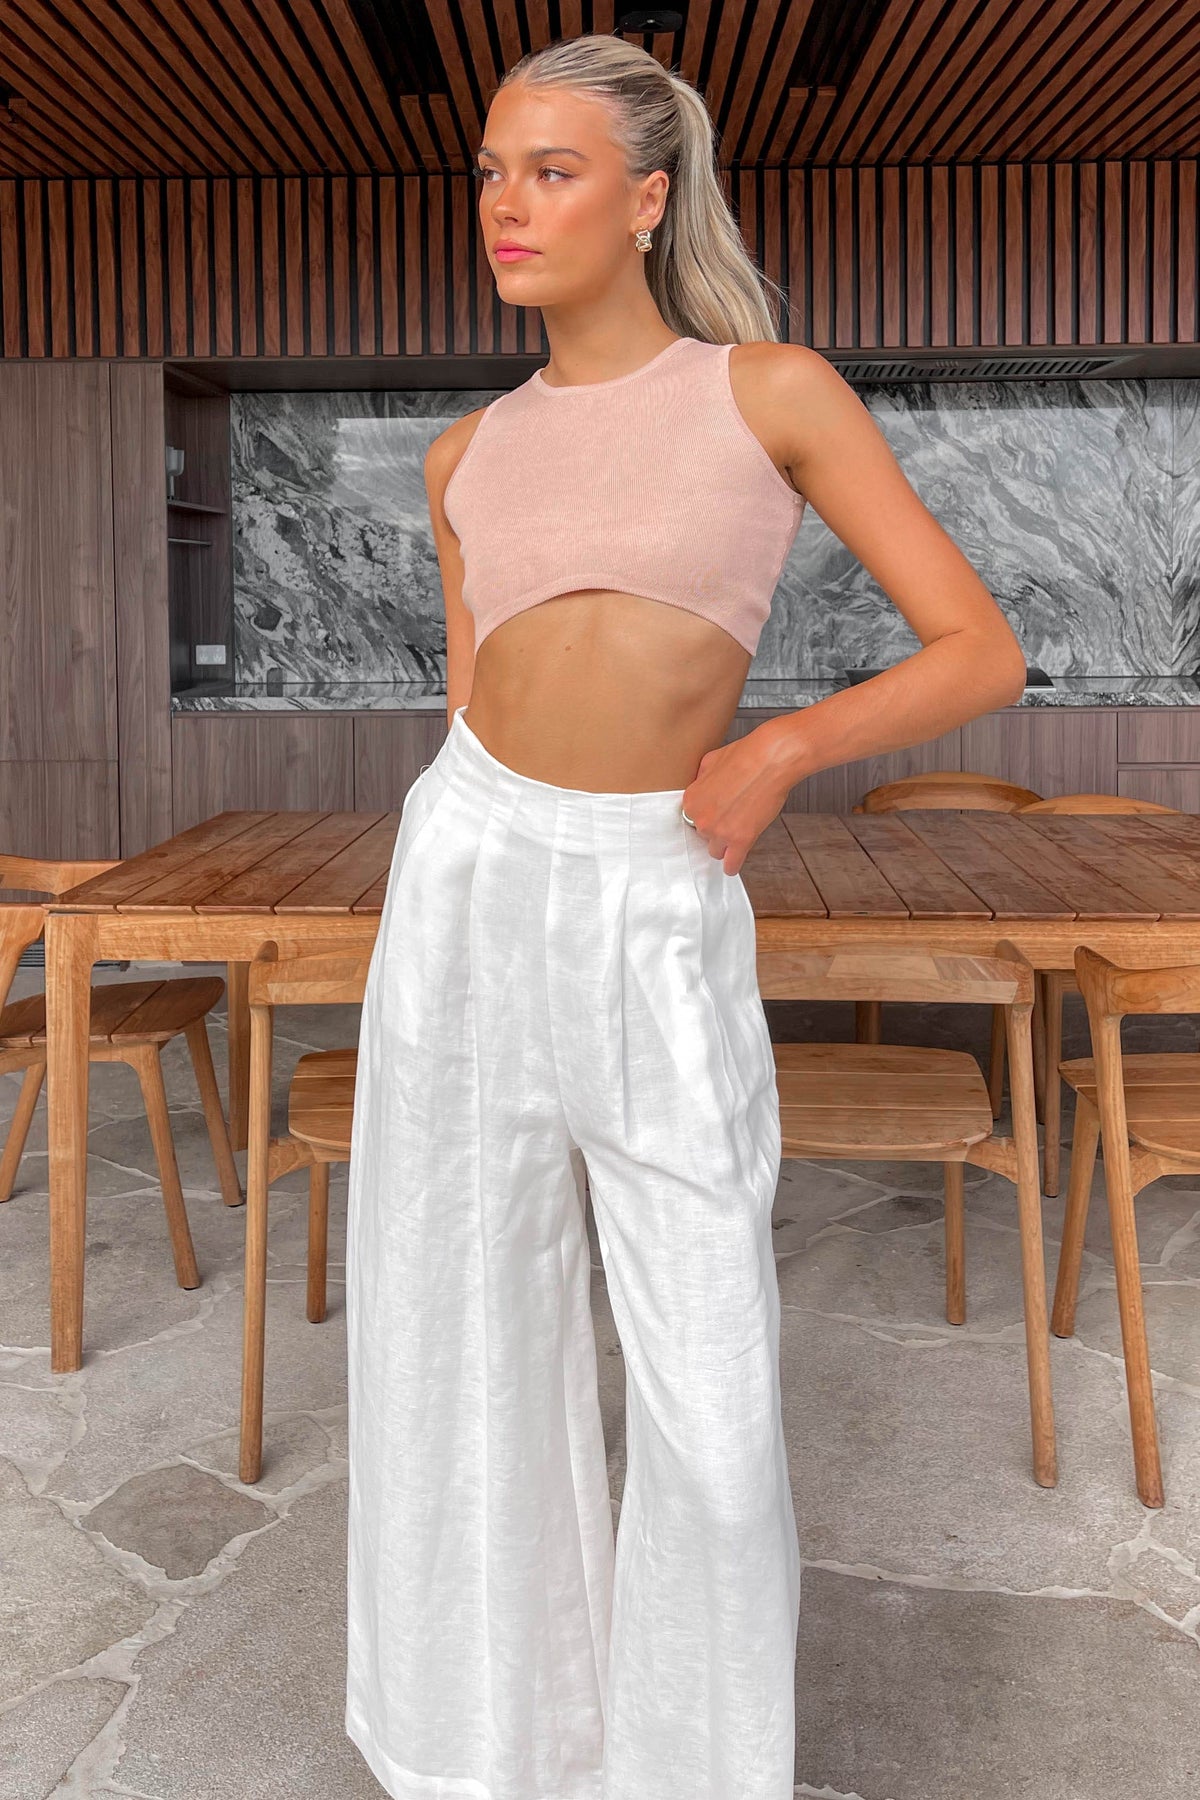 Ambar Top, BROWN, COTTON &amp; POLYESTER, COTTON AND POLYESTER, CROP TOP, CROP TOPS, new arrivals, POLYESTER AND COTTON, TOP, TOPS, , -MISHKAH